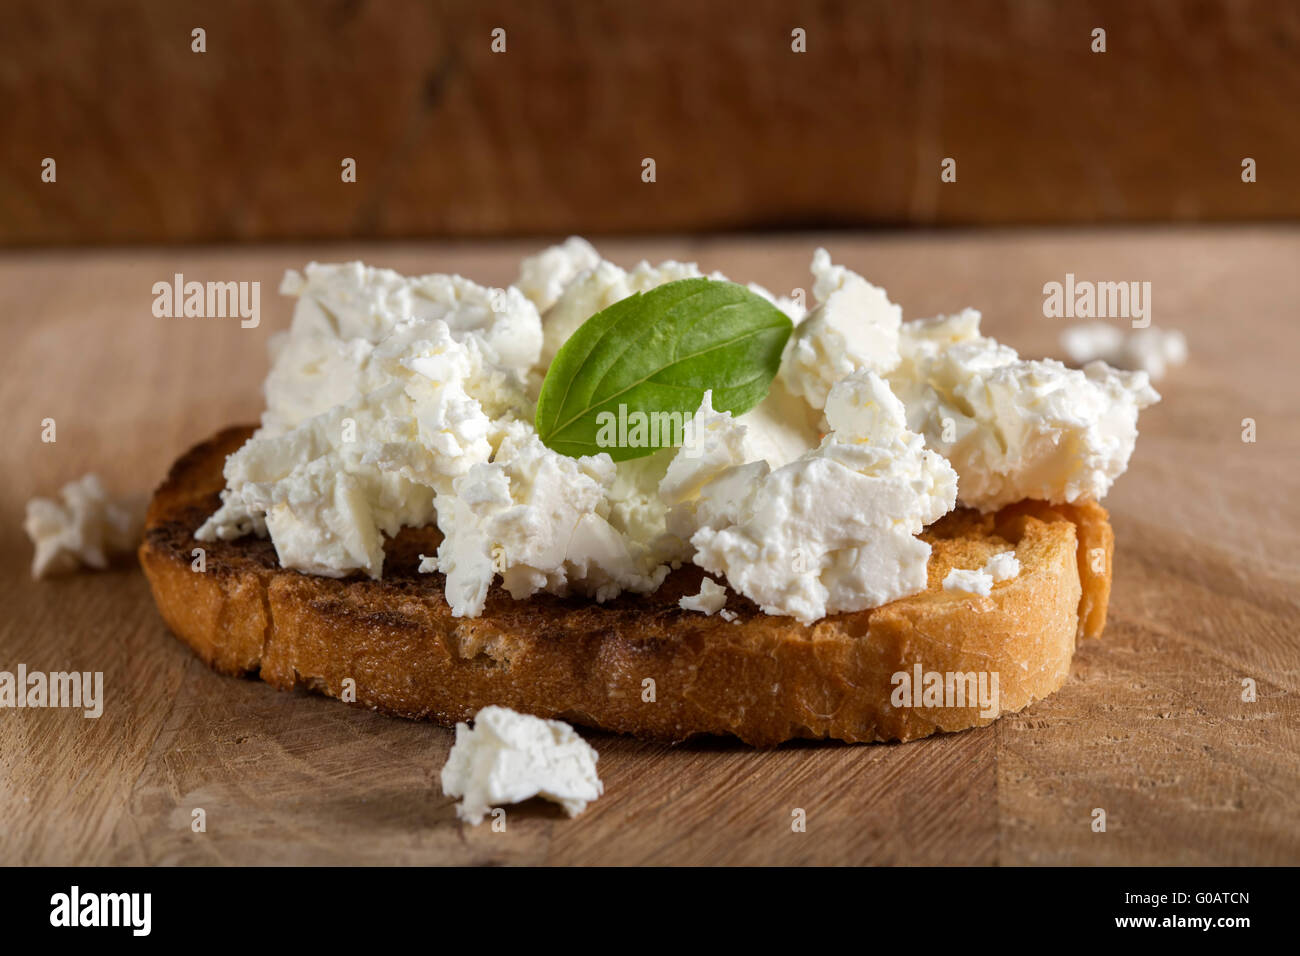 Rye sandwiches or bruschetta with ricotta cheese and basil on wooden board Stock Photo